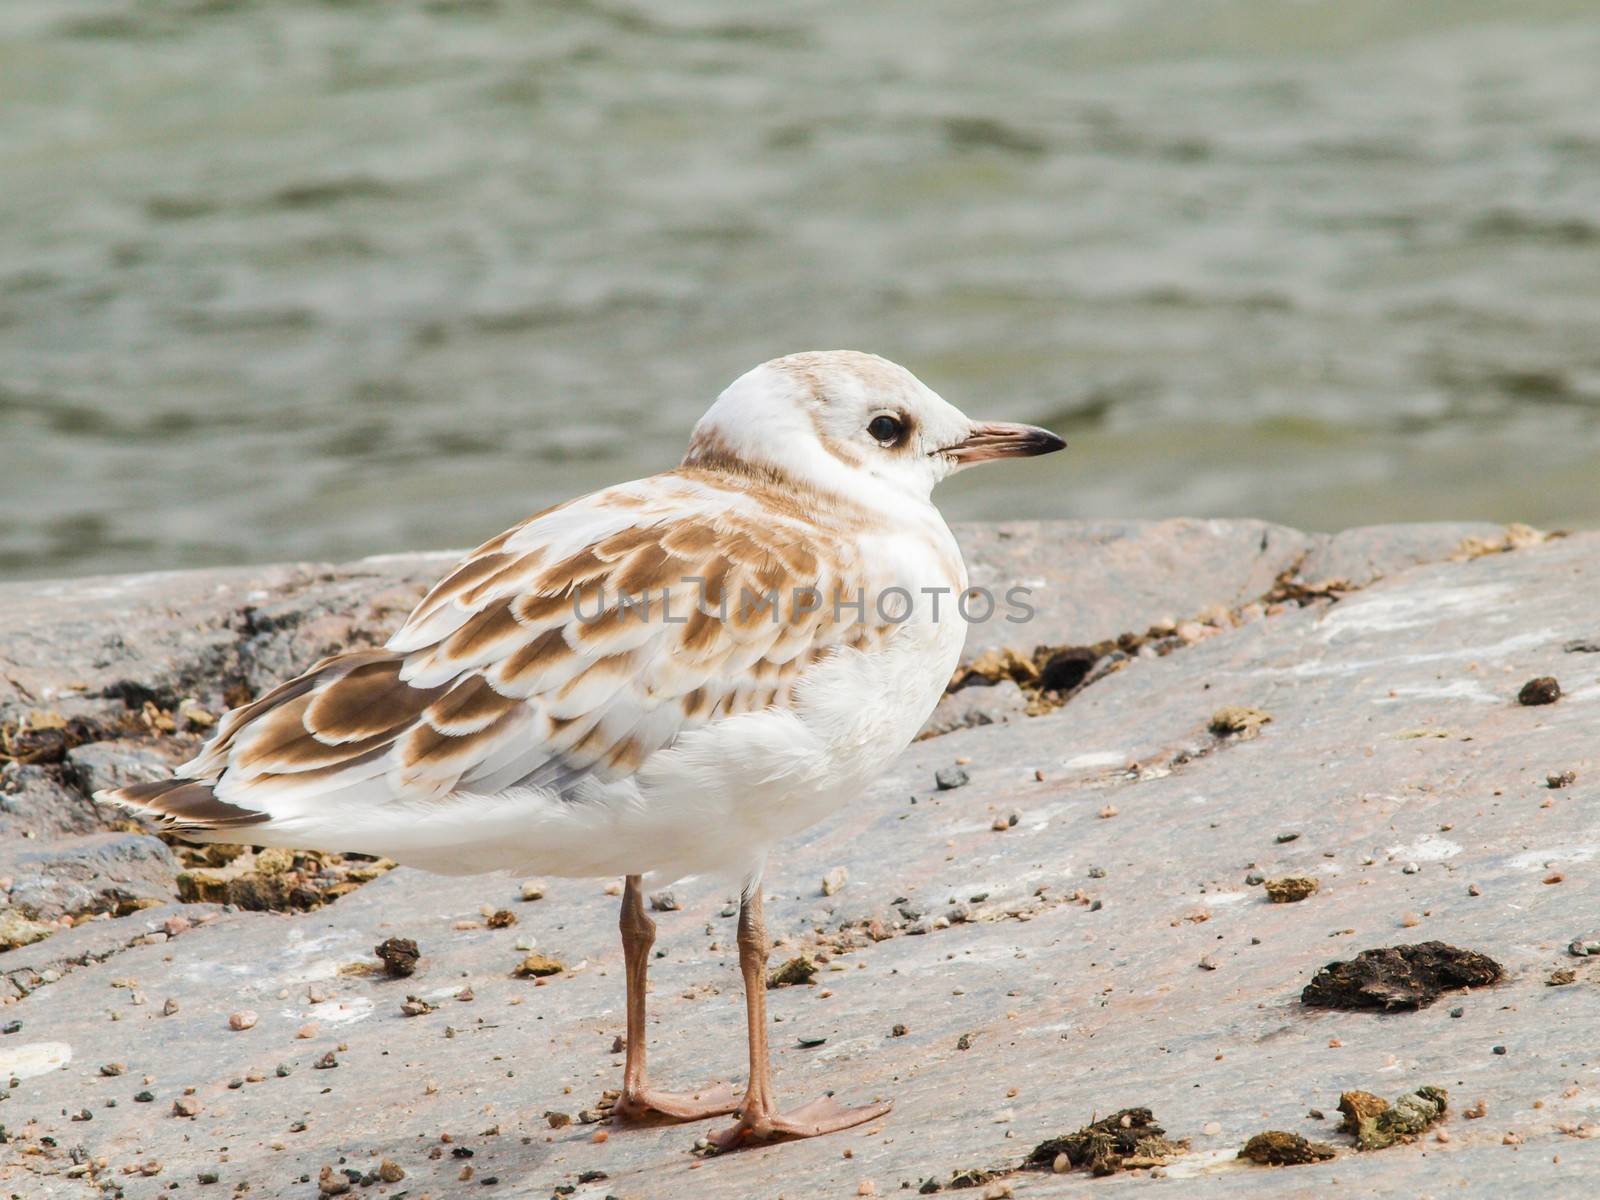 Young seagull by Arvebettum